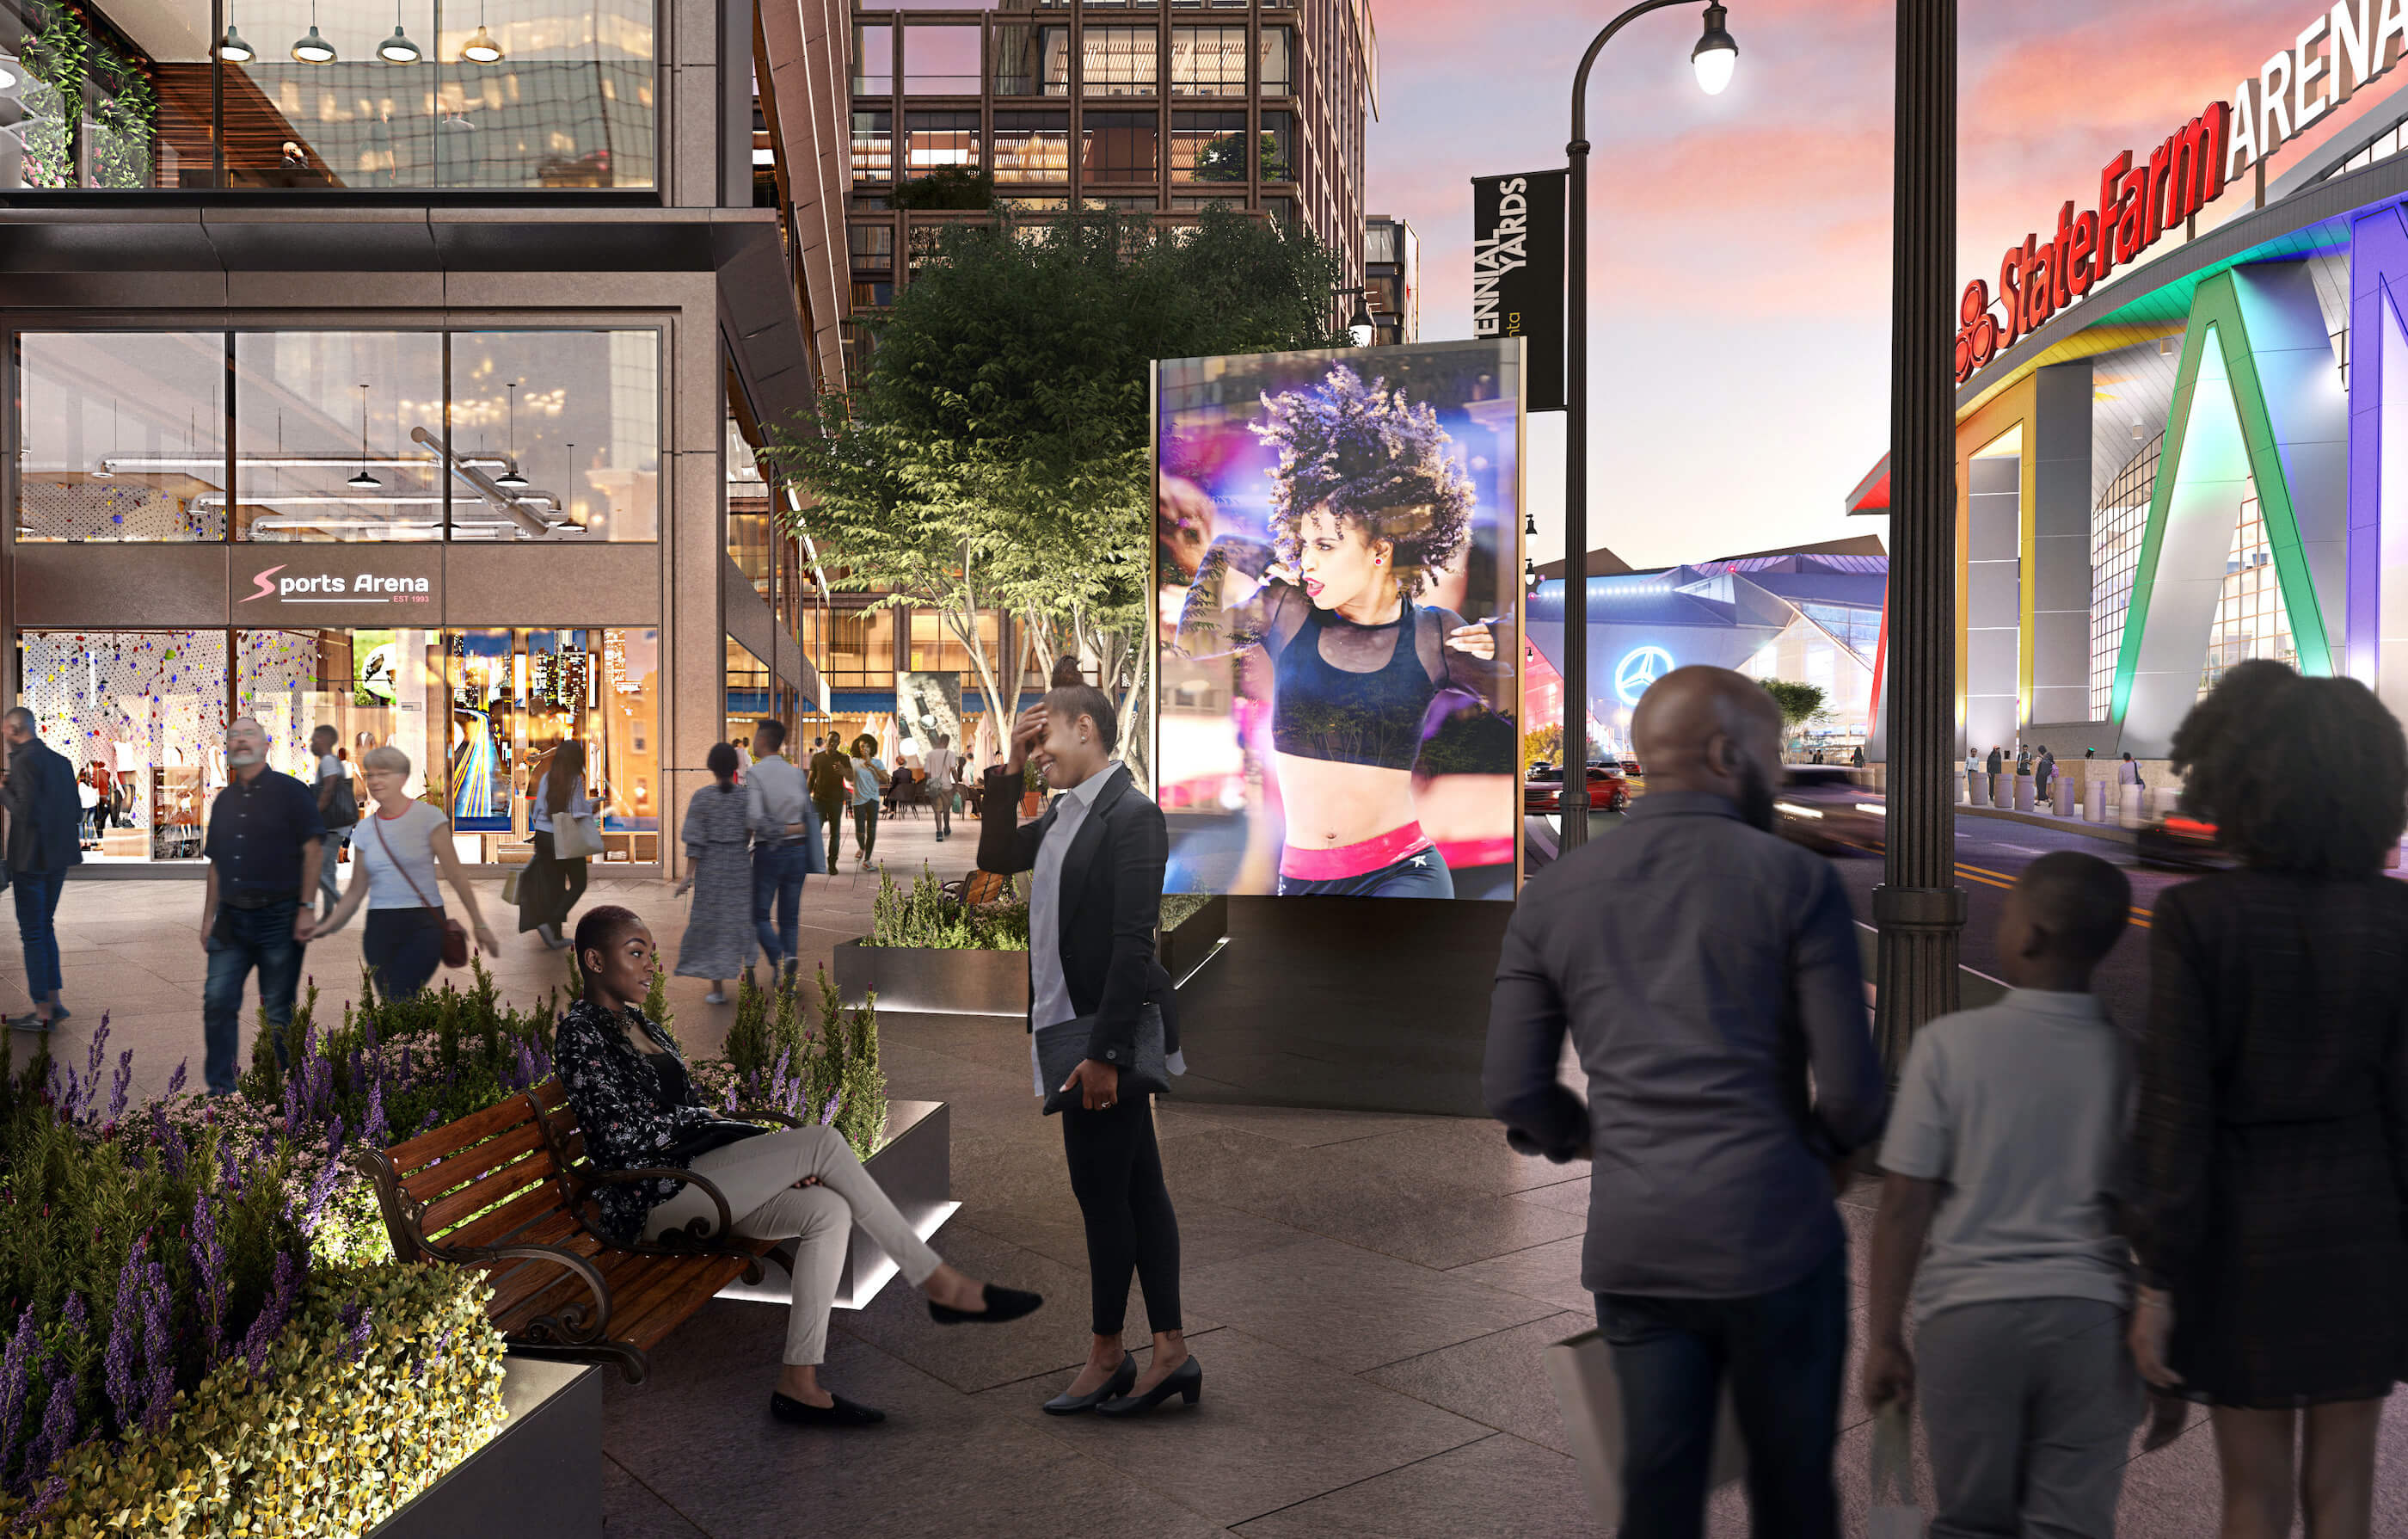 rendering of a bustling public plaza opposite an atlanta sports arenea